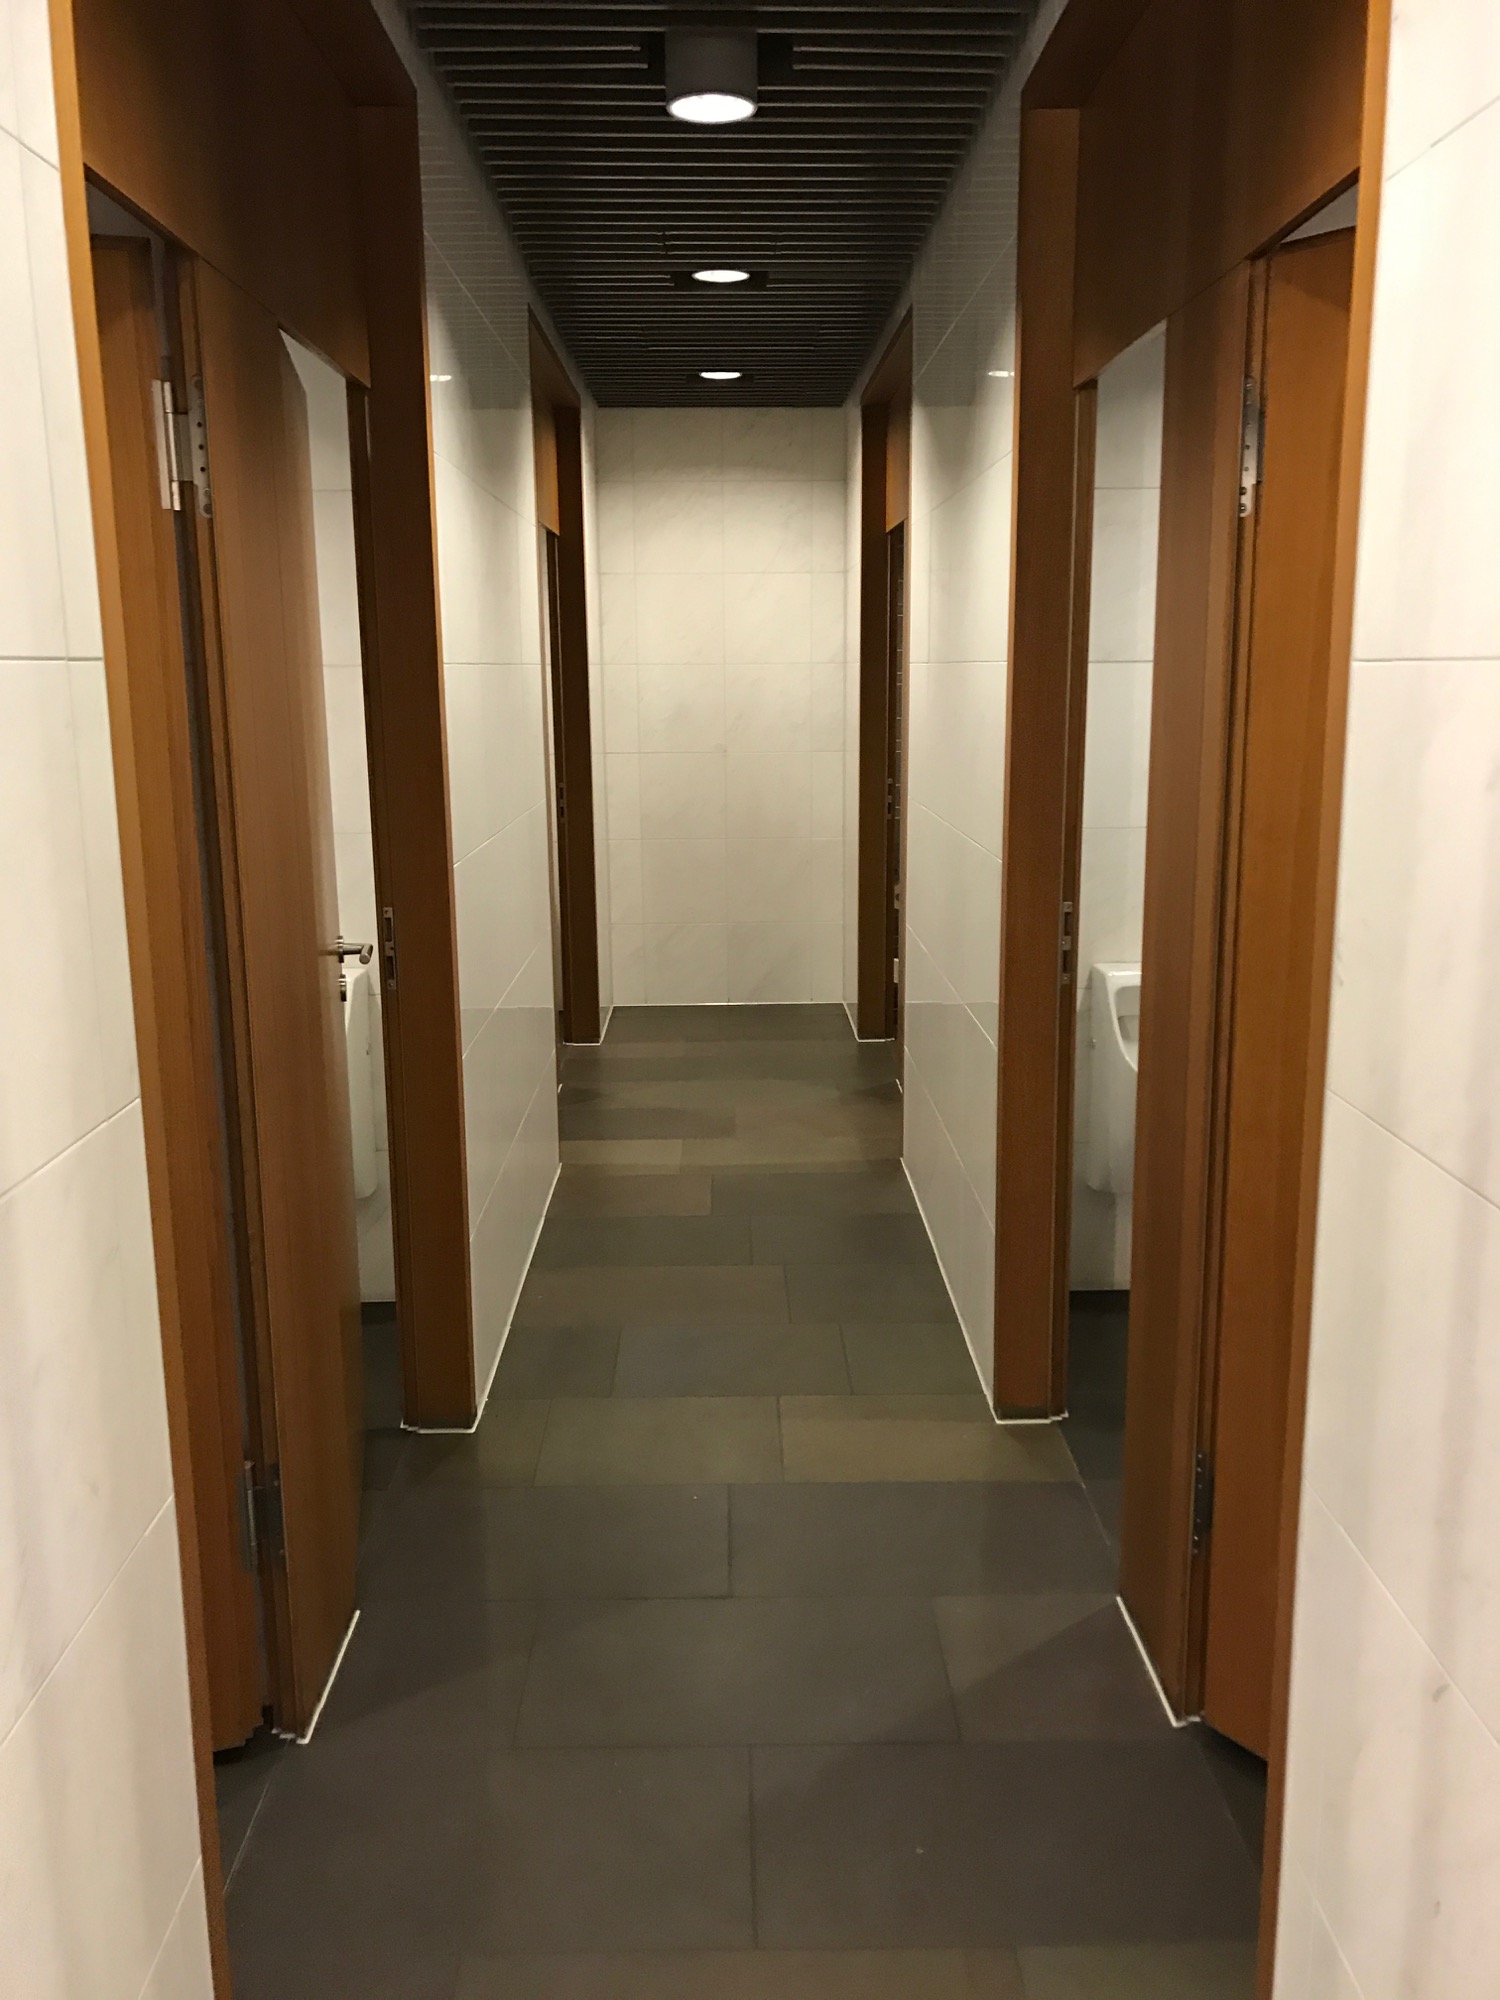 a hallway with doors and a urinal